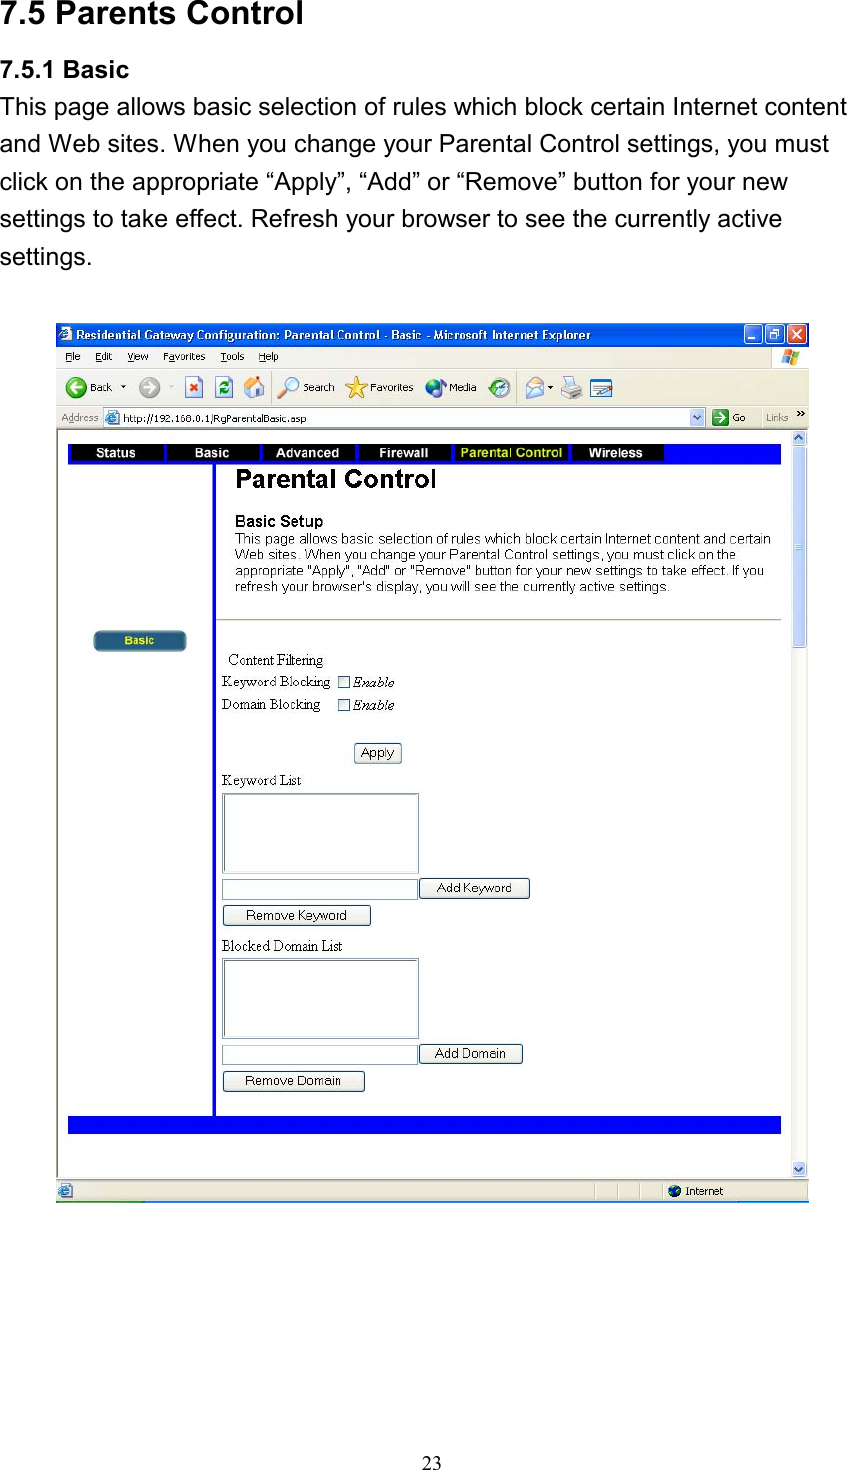 7.5 Parents Control 7.5.1 Basic This page allows basic selection of rules which block certain Internet content and Web sites. When you change your Parental Control settings, you must click on the appropriate “Apply”, “Add” or “Remove” button for your new settings to take effect. Refresh your browser to see the currently active settings.     23